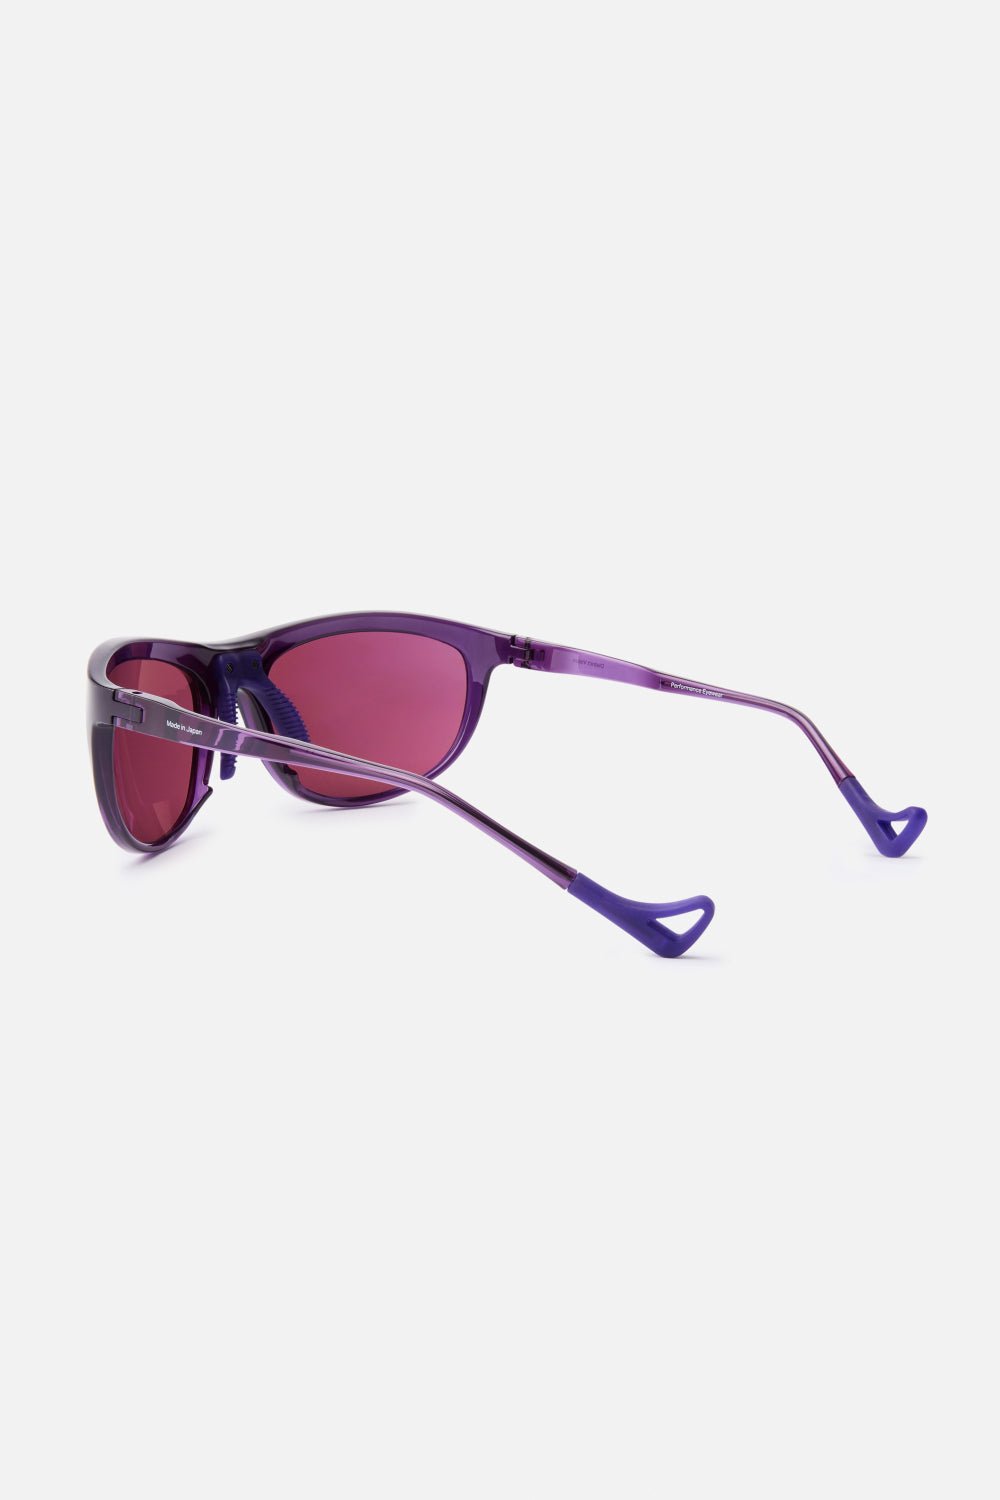 District Vision Takeyoshi Altitude Master Sunglasses - Nightshade/D+ Black Rose | Coffee Outdoors